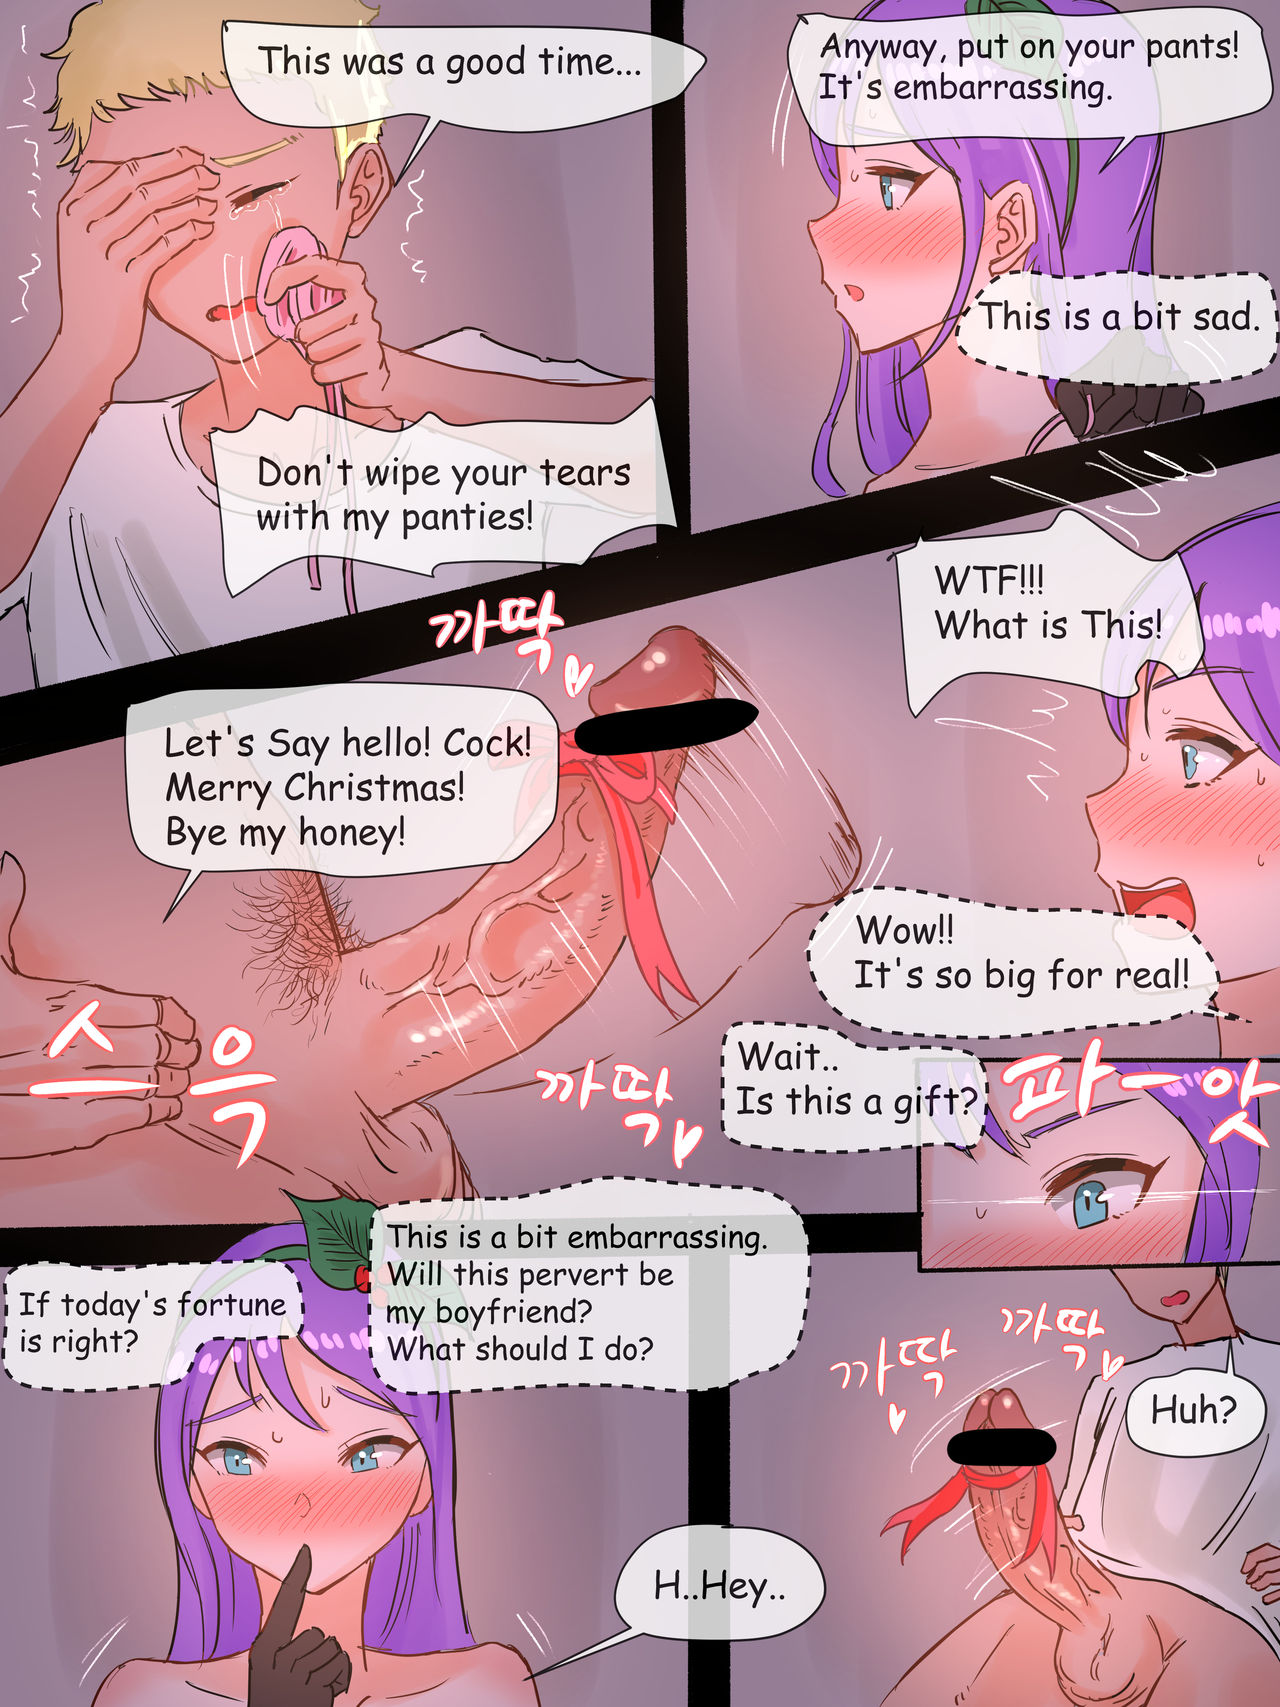 [laliberte] Fortune of today (League of Legends) [English] page 9 full